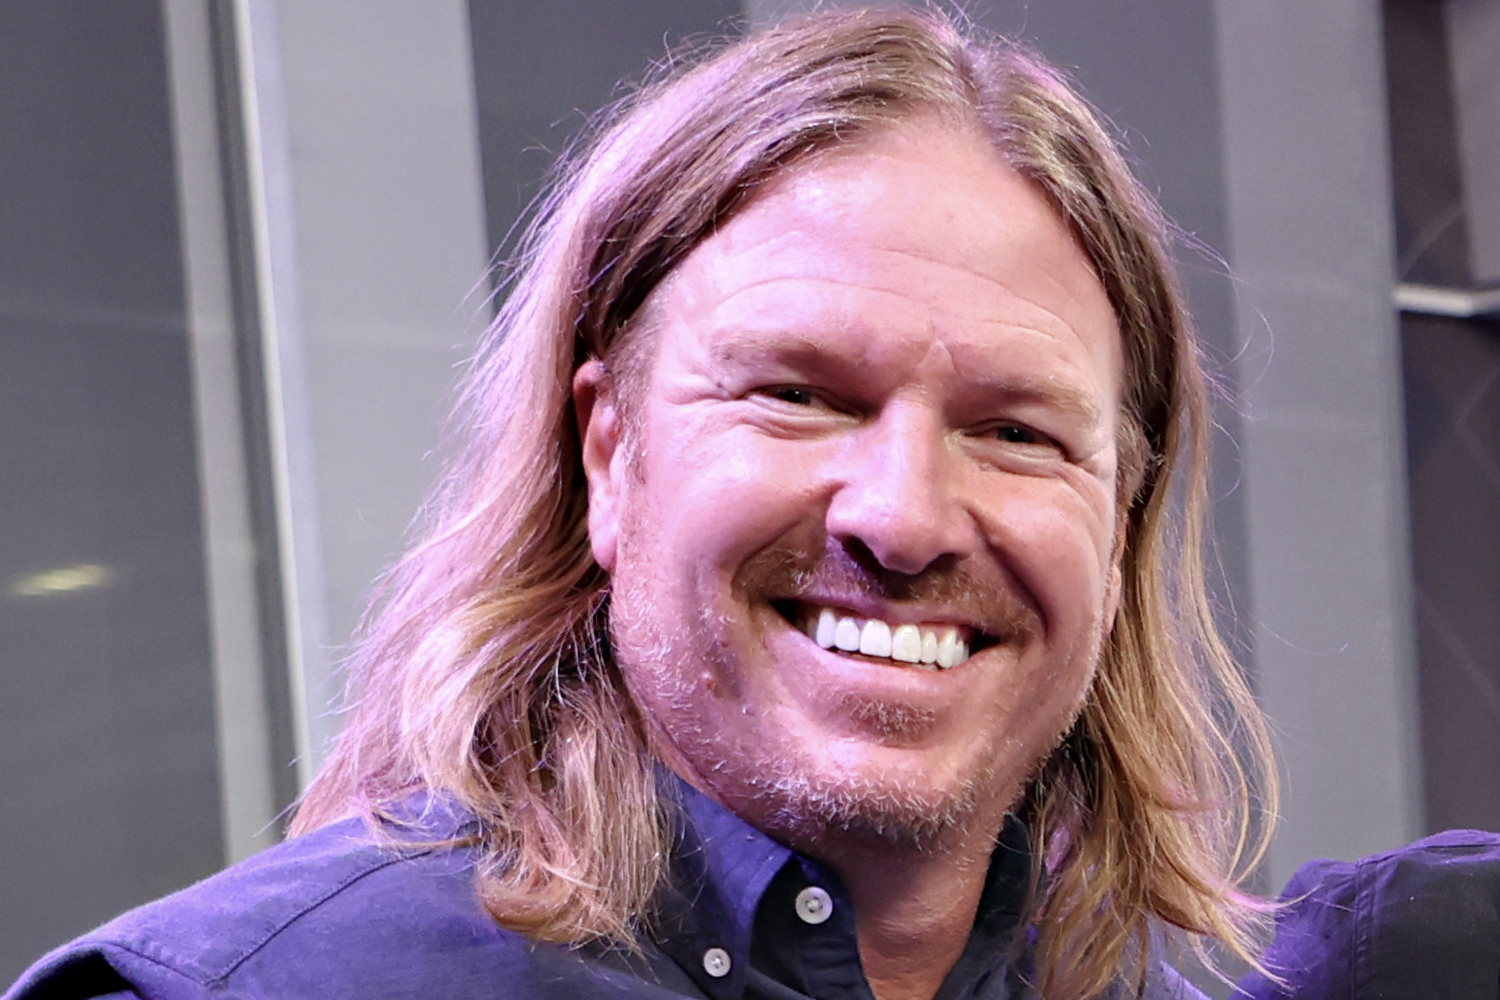 Chip Gaines sporting his long locks and smiling